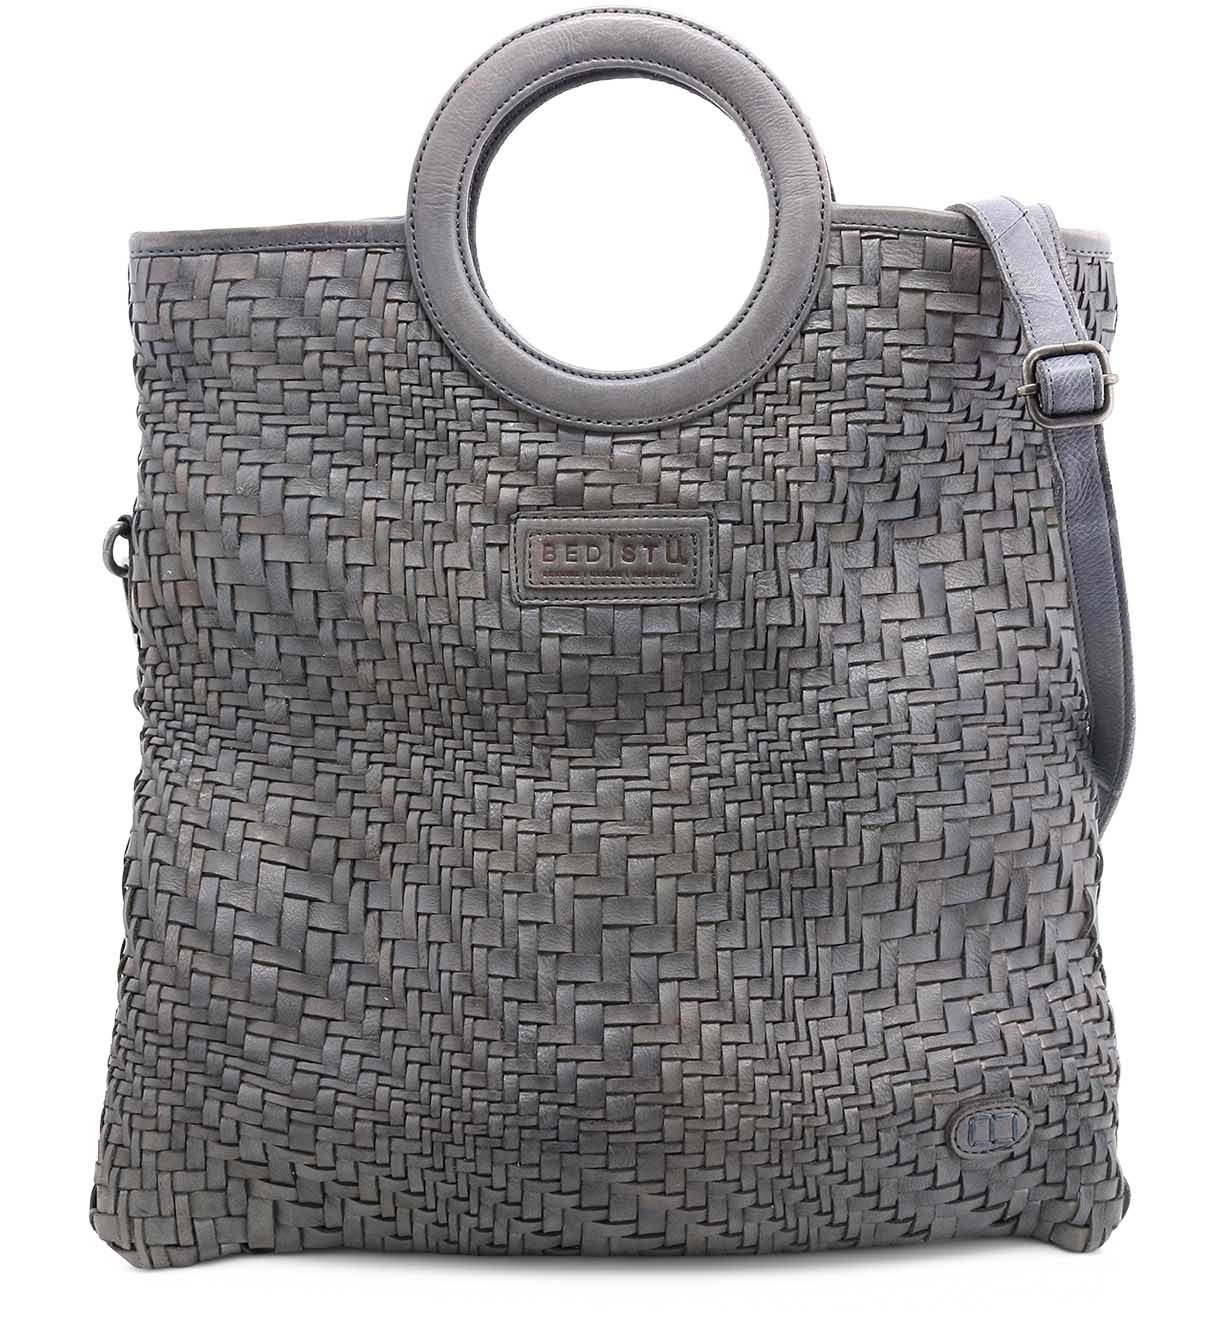 A grey woven Adele bag with a Bed Stu metal handle.